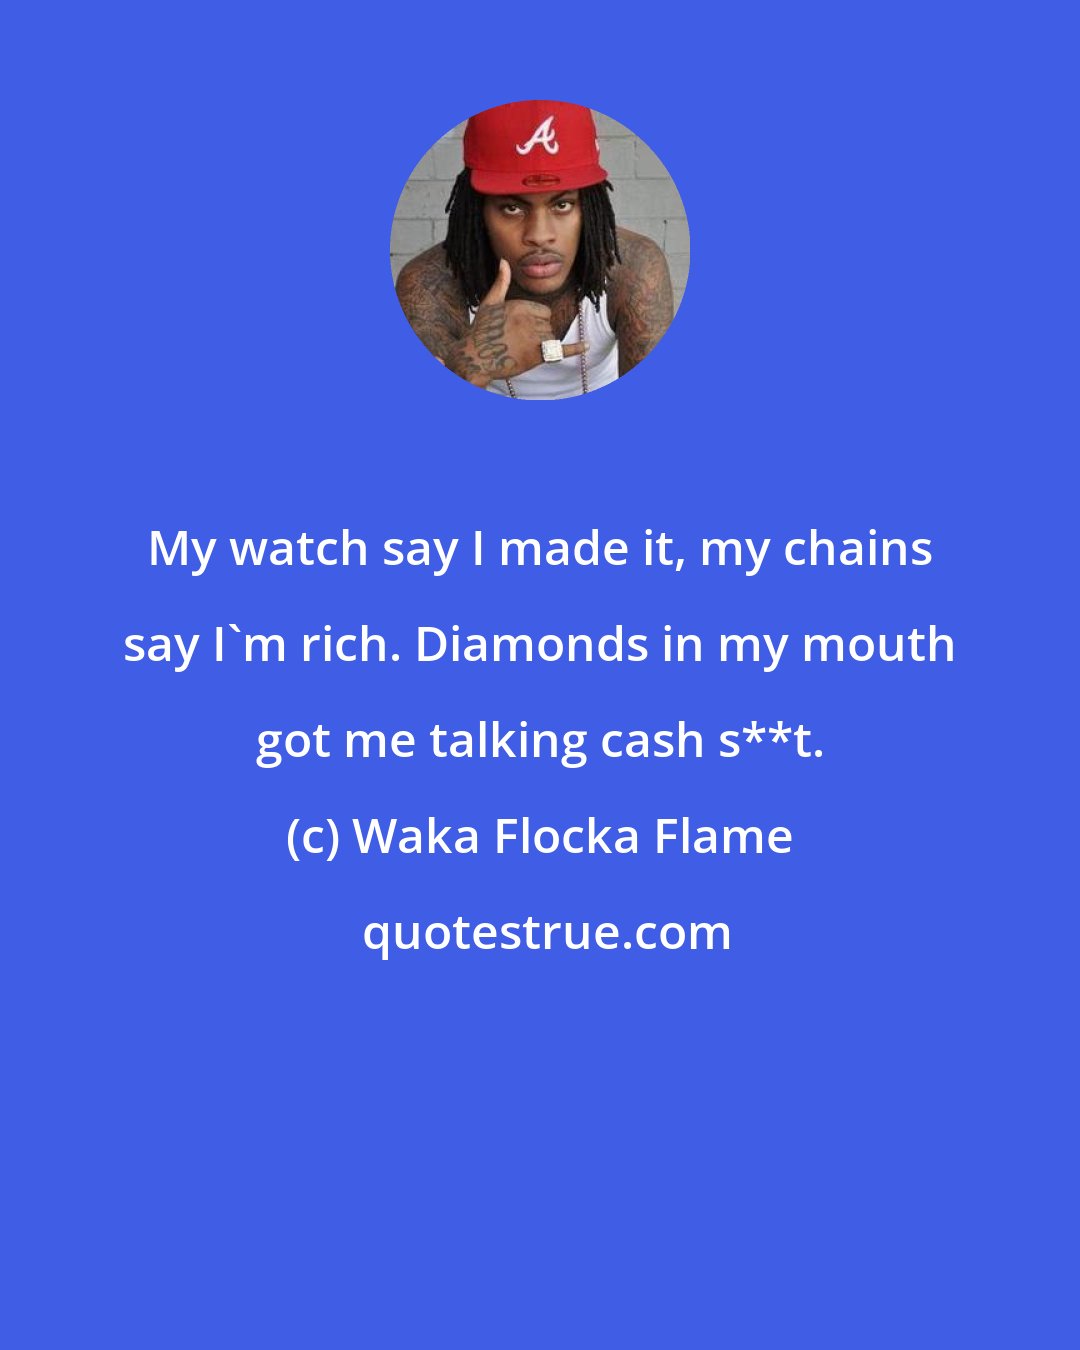 Waka Flocka Flame: My watch say I made it, my chains say I'm rich. Diamonds in my mouth got me talking cash s**t.